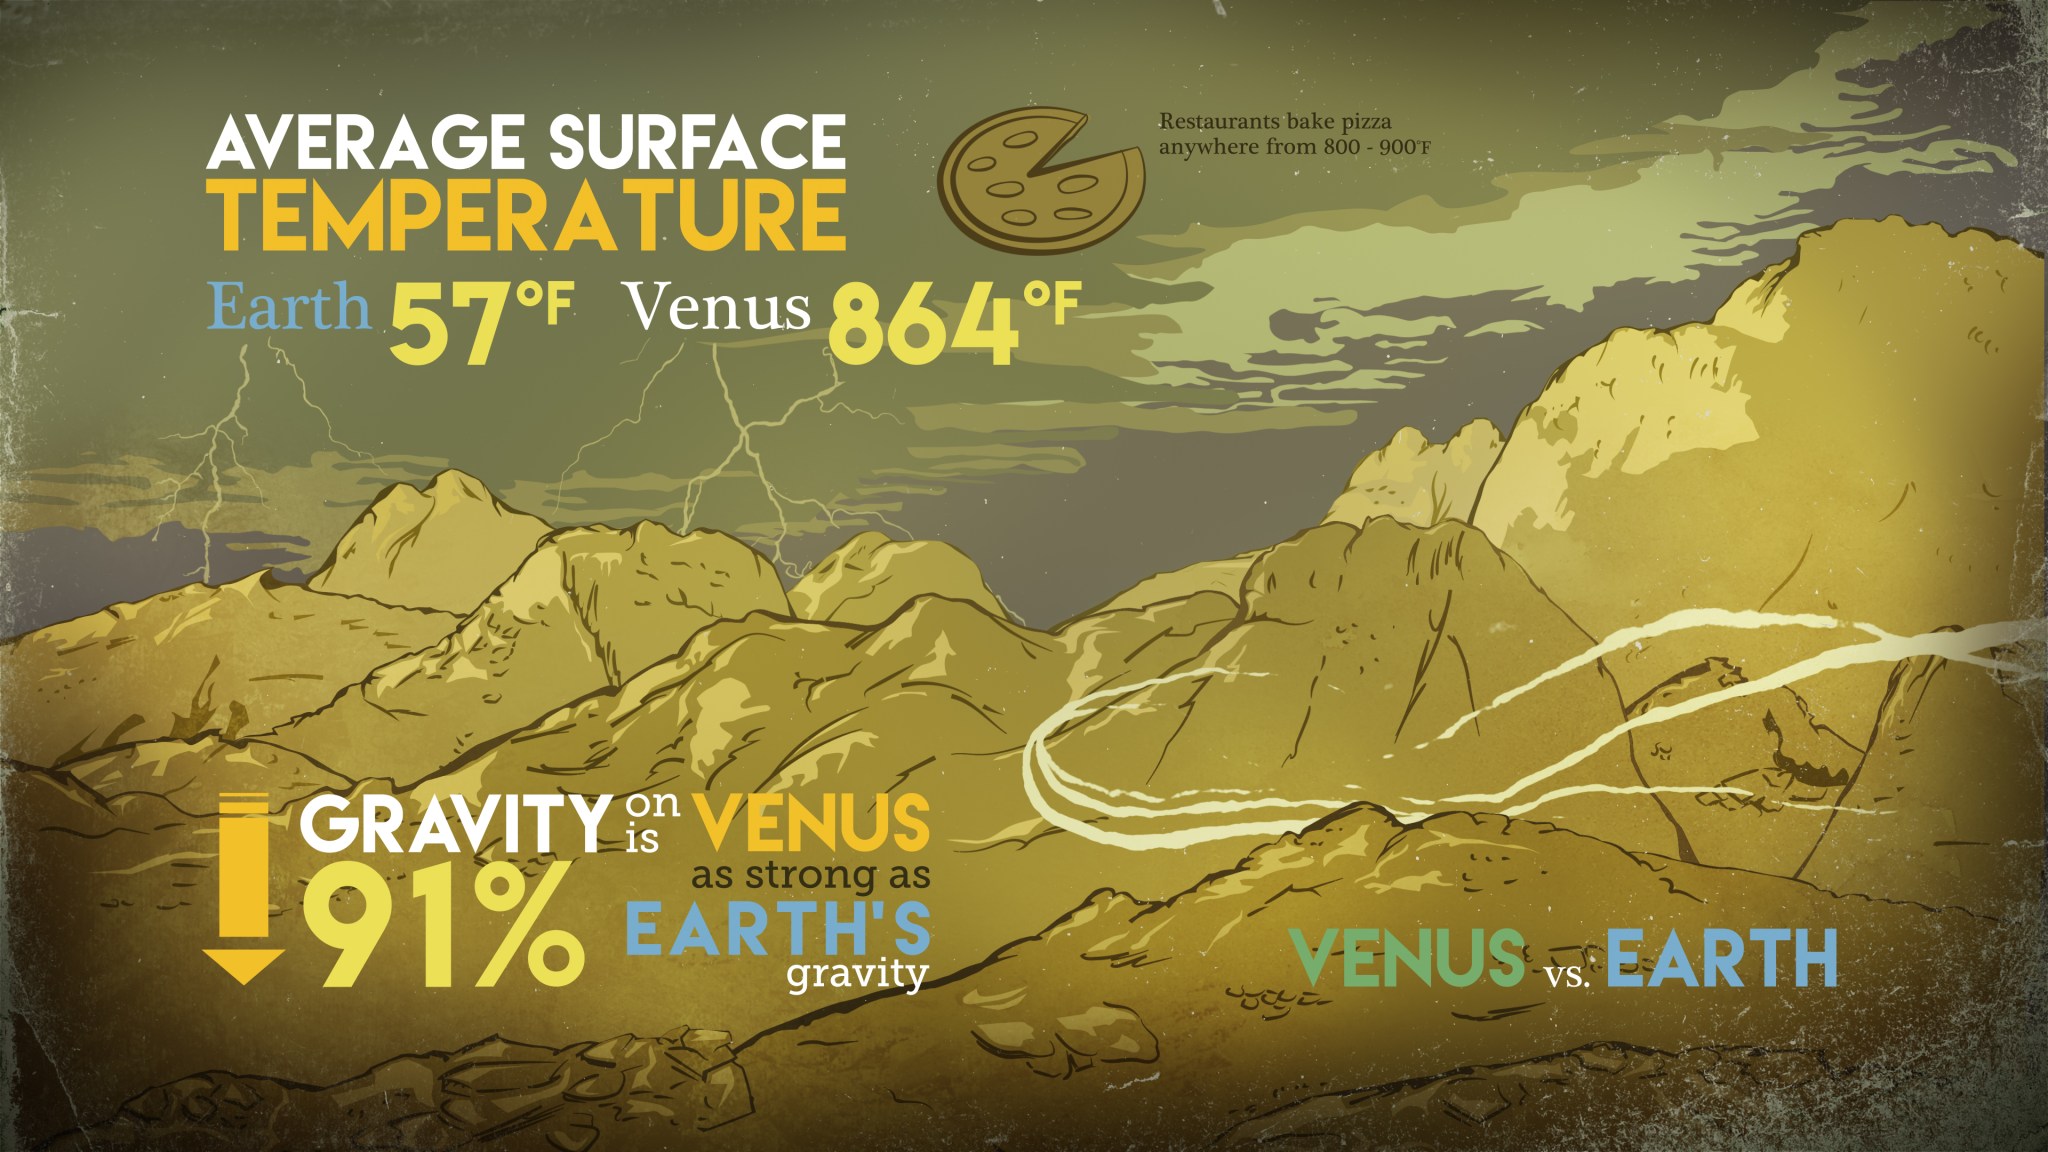 This graphic compares surface temperatures and gravity on Earth and Venus.